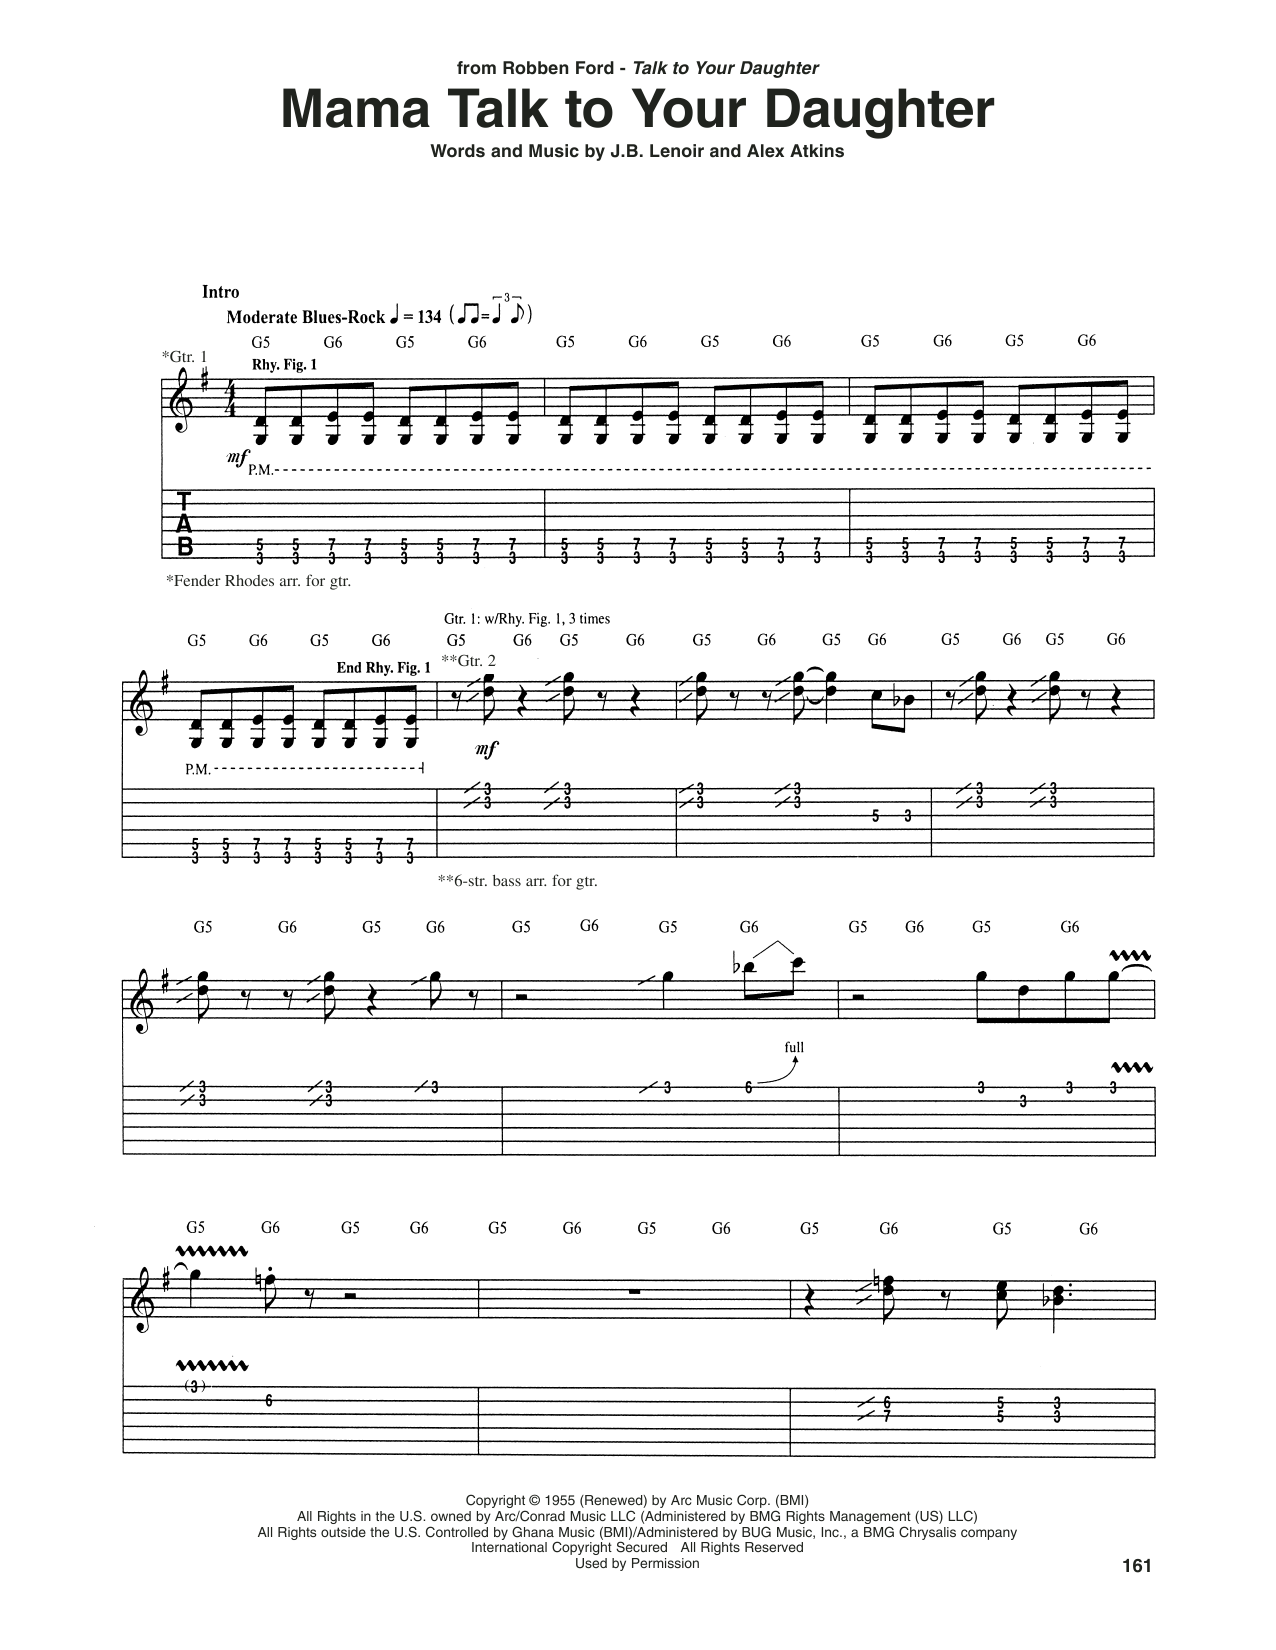 Download Robben Ford Mama Talk To Your Daughter Sheet Music